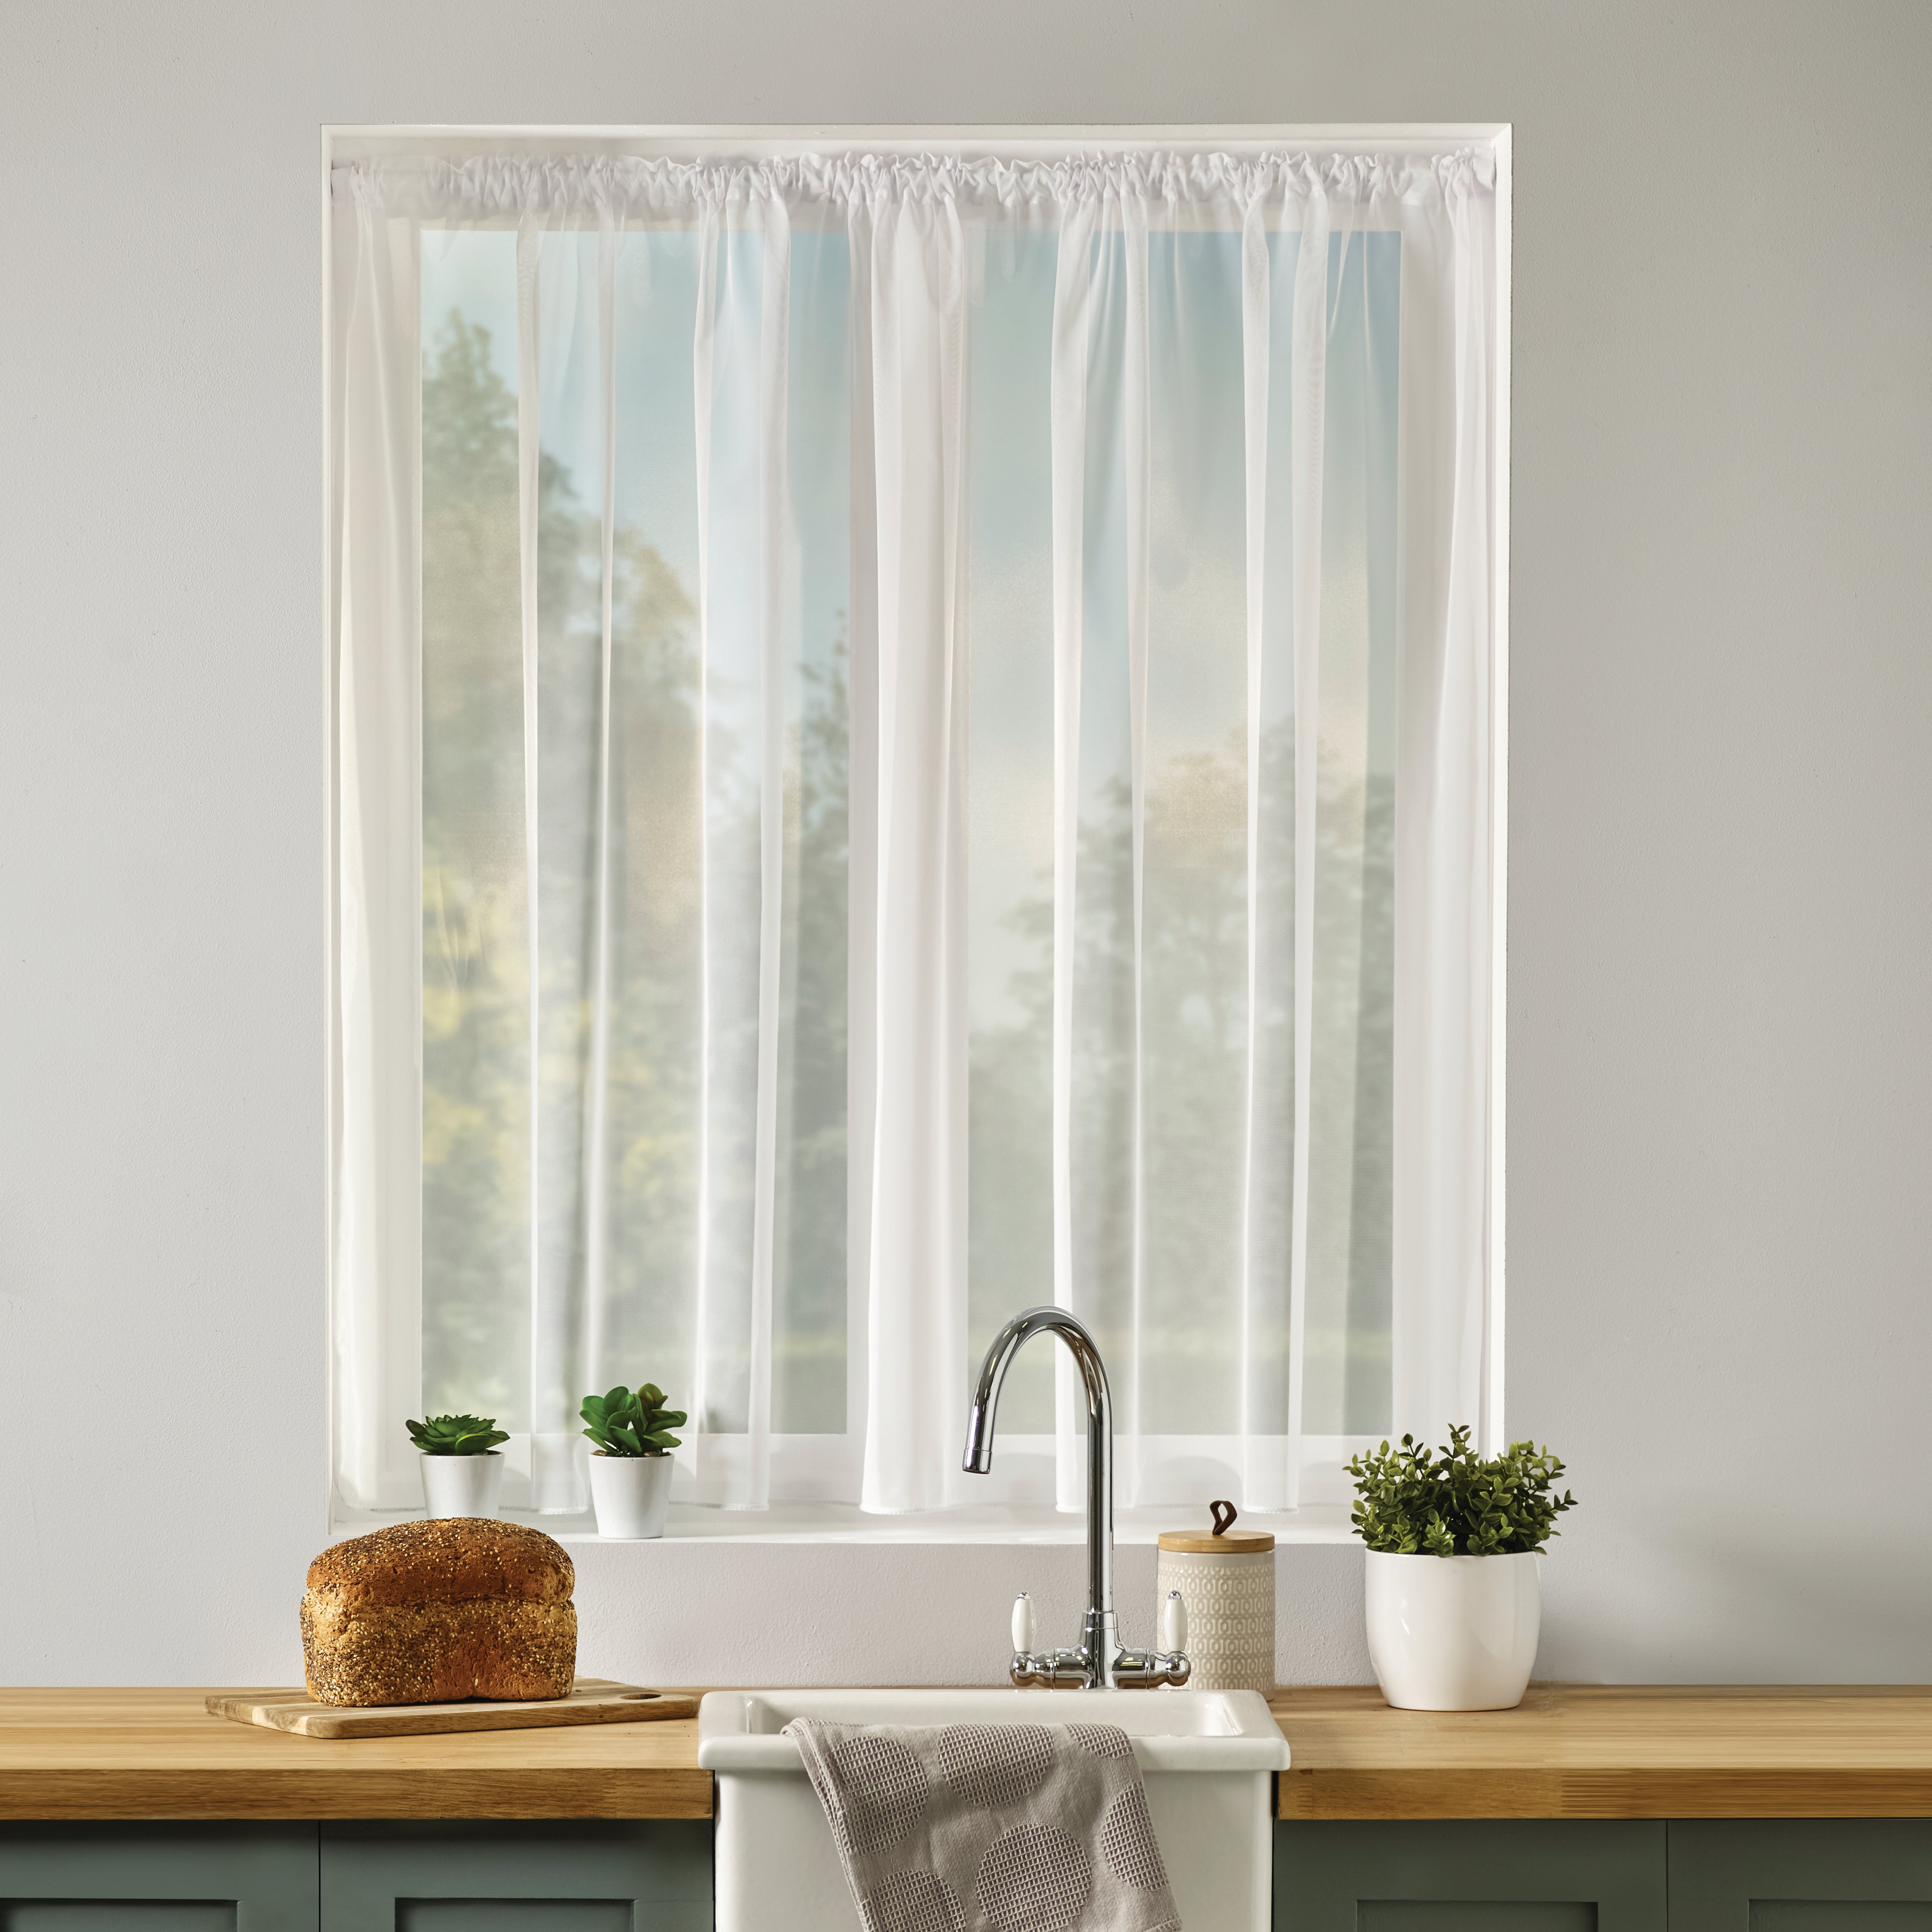 How To Measure For Net Curtains Dunelm - Bessie McCollough blog